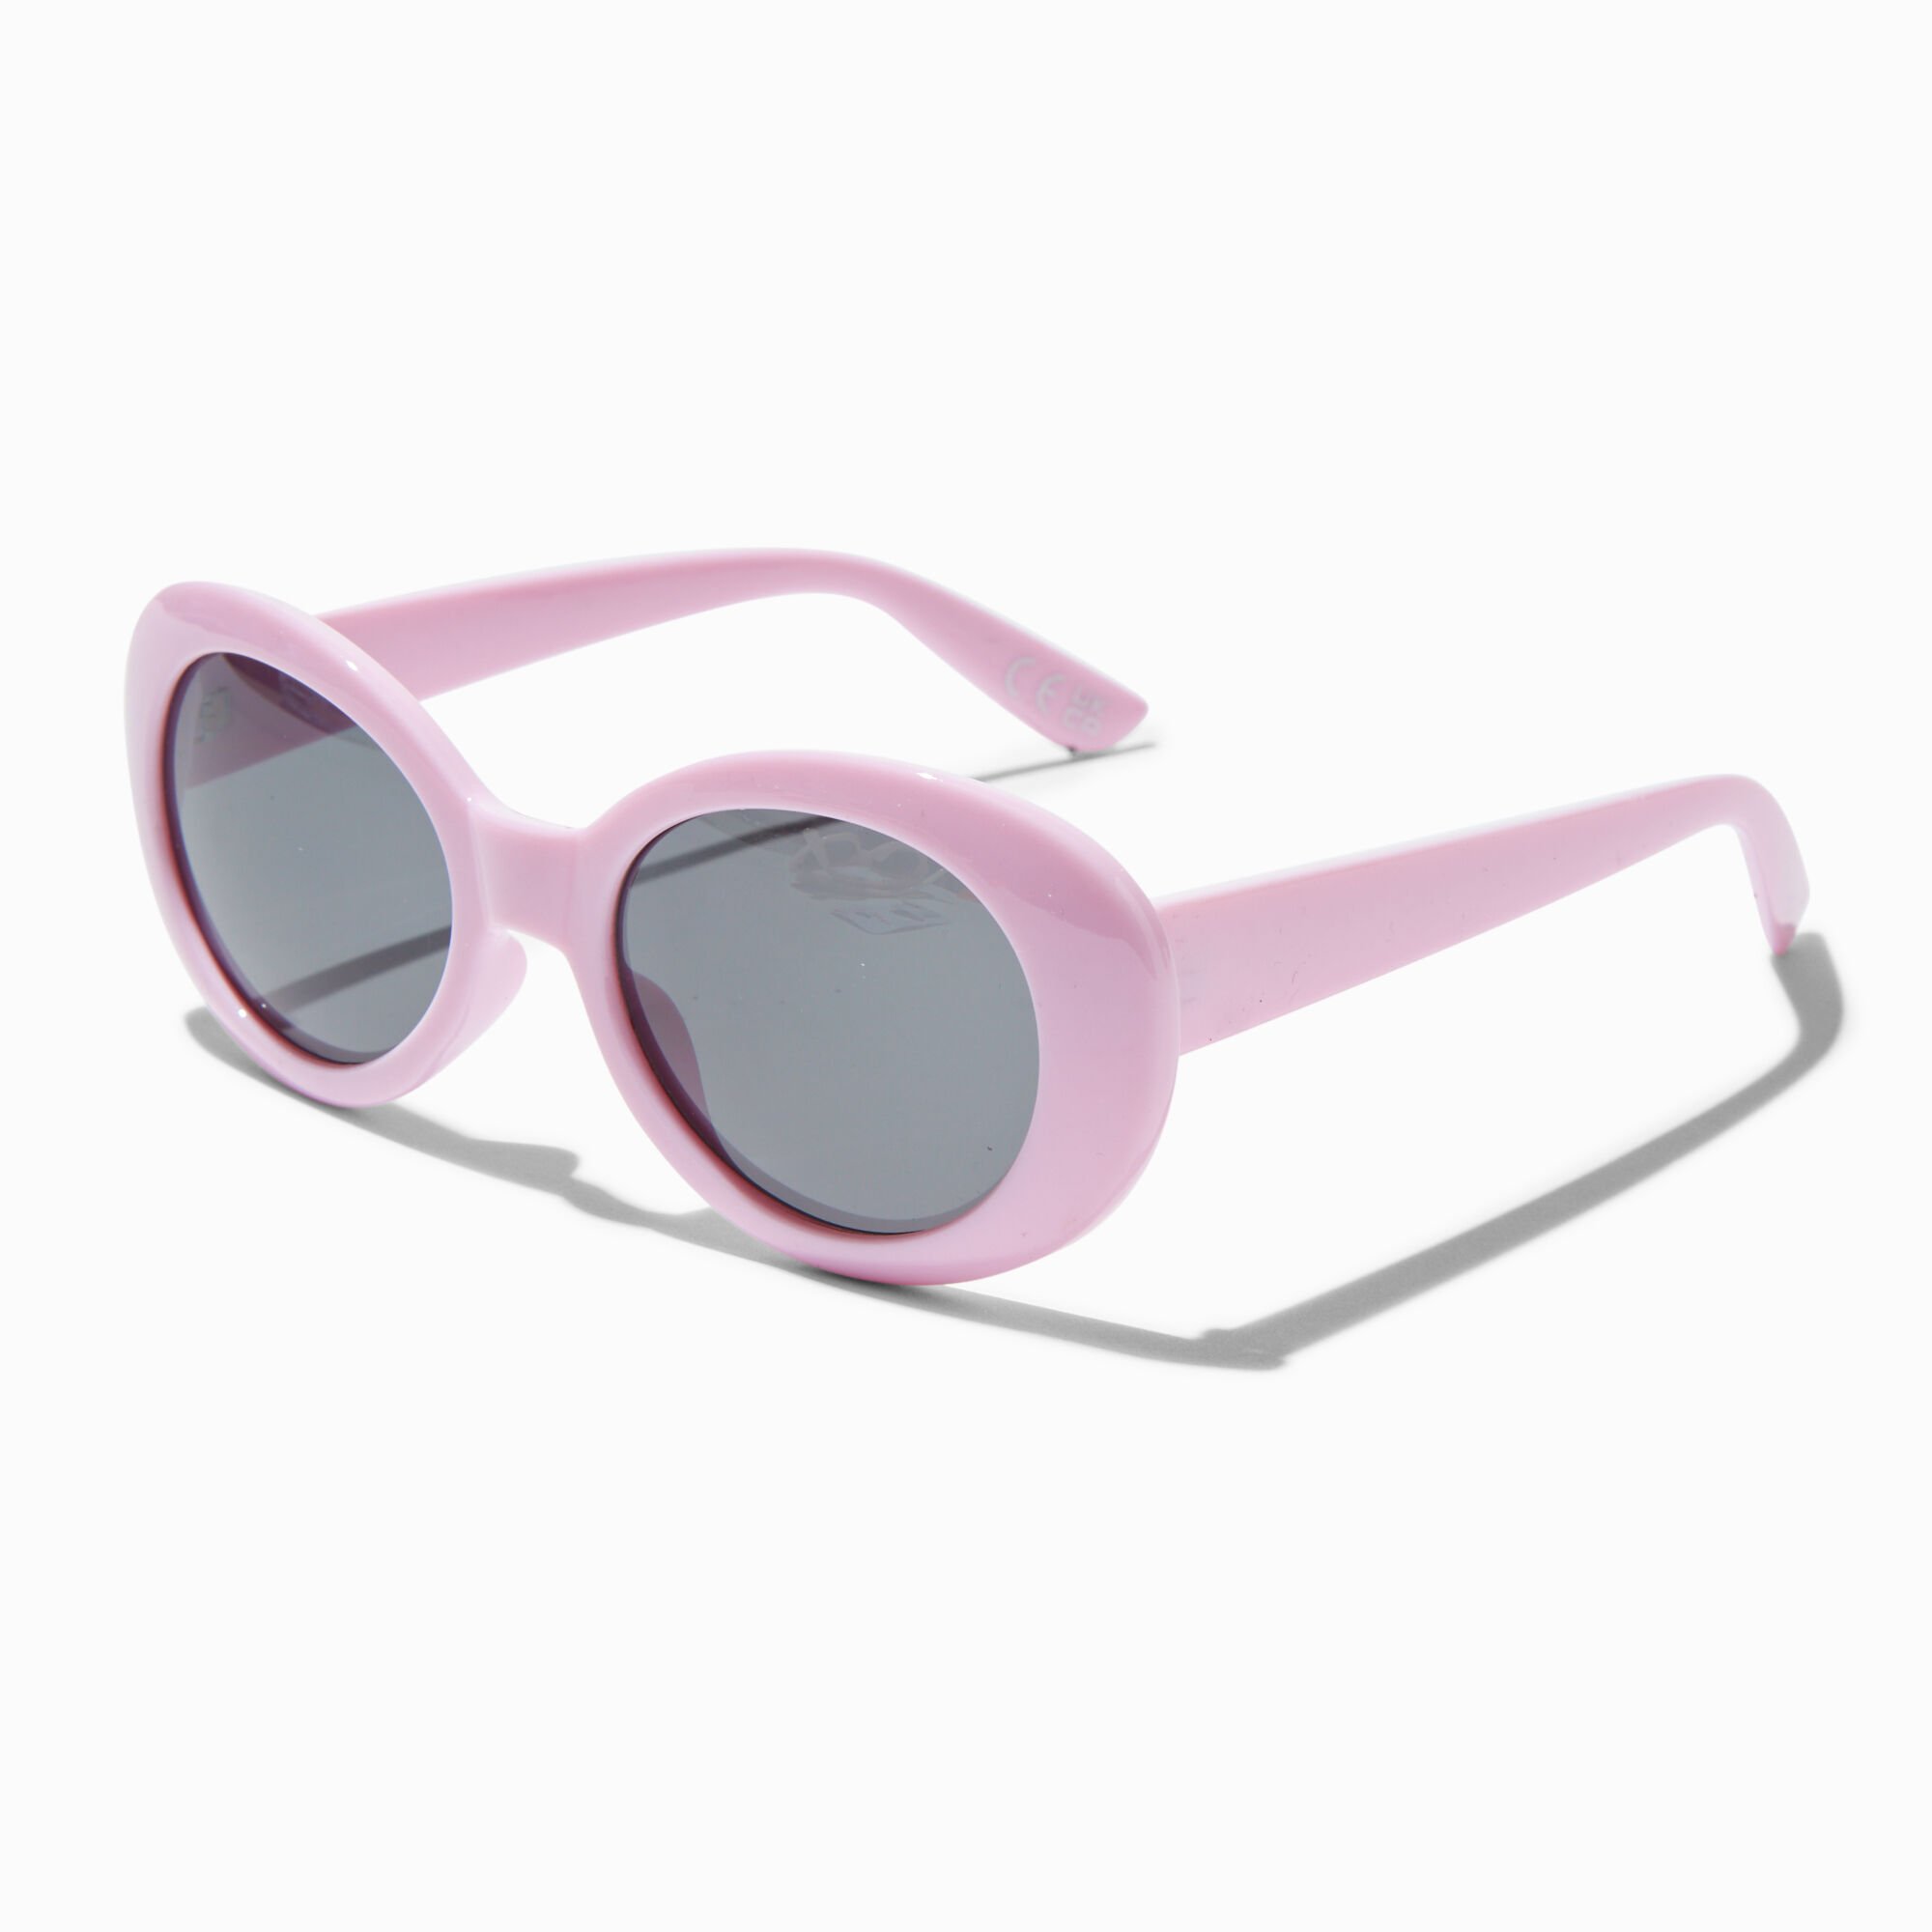 View Claires Chunky Blush Mod Sunglasses Pink information